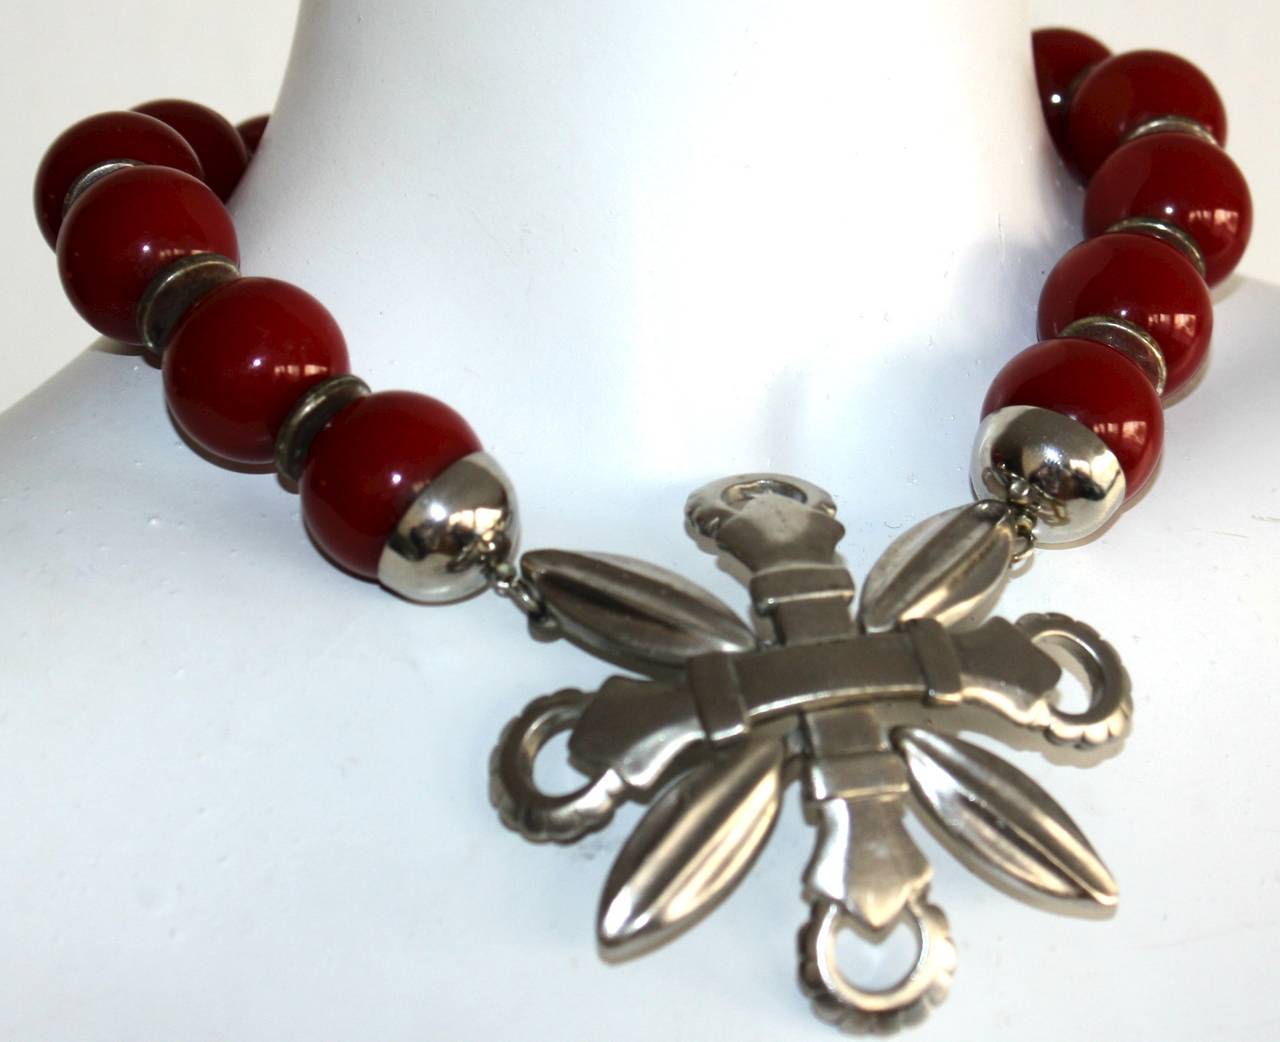 Amazing vintage Pierre Cardin & Castlecliff Deep Red Ball necklace! Beautiful matte silver shield pendant. Signed, 